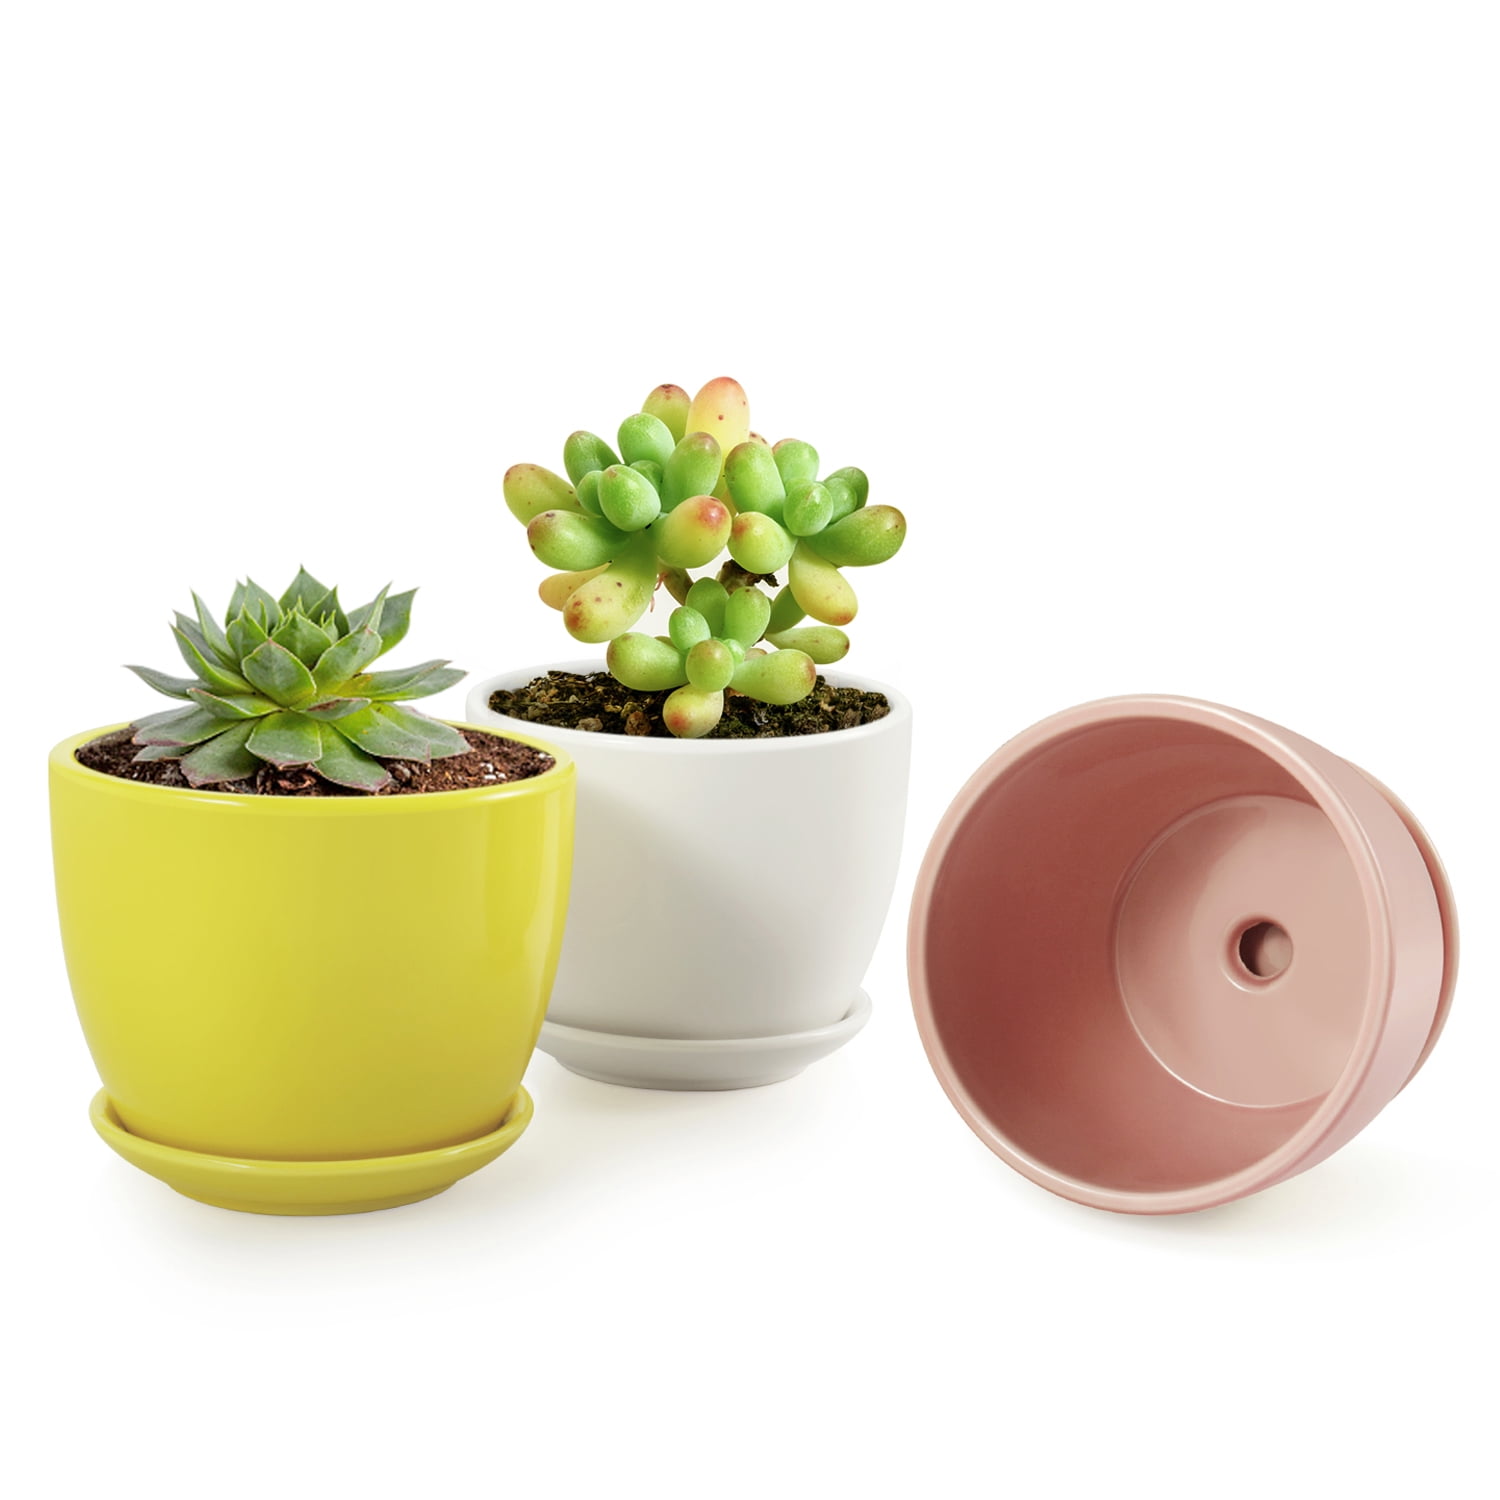 Brajttt Flower Pots,6 Inch Succulent Pots with Drinage,Indoor Round Planter  Pots with Saucer,White Cactus Planters with Hole,Outdoor Graden Pots 4